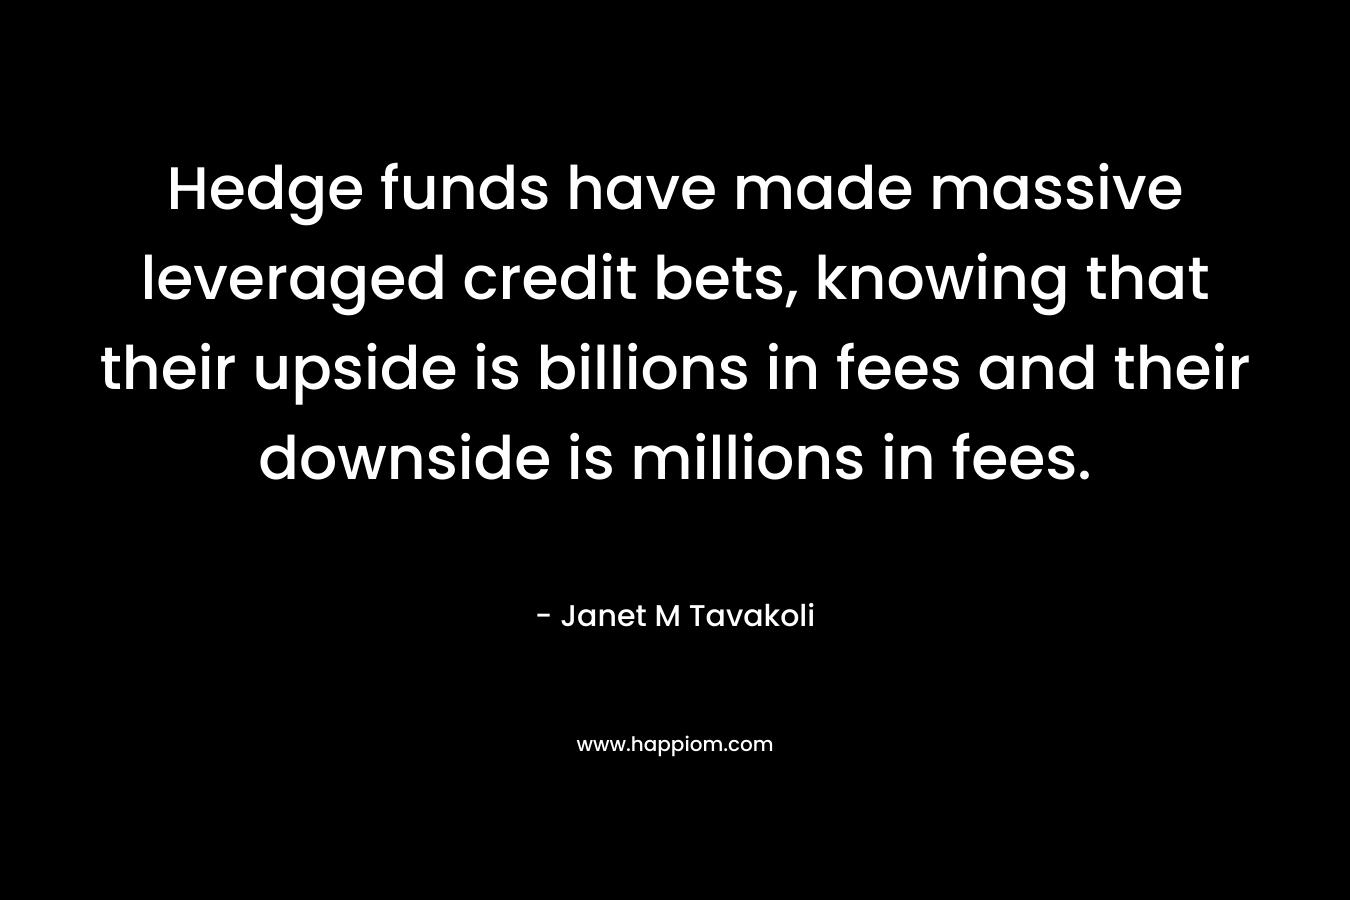 Hedge funds have made massive leveraged credit bets, knowing that their upside is billions in fees and their downside is millions in fees. – Janet M Tavakoli